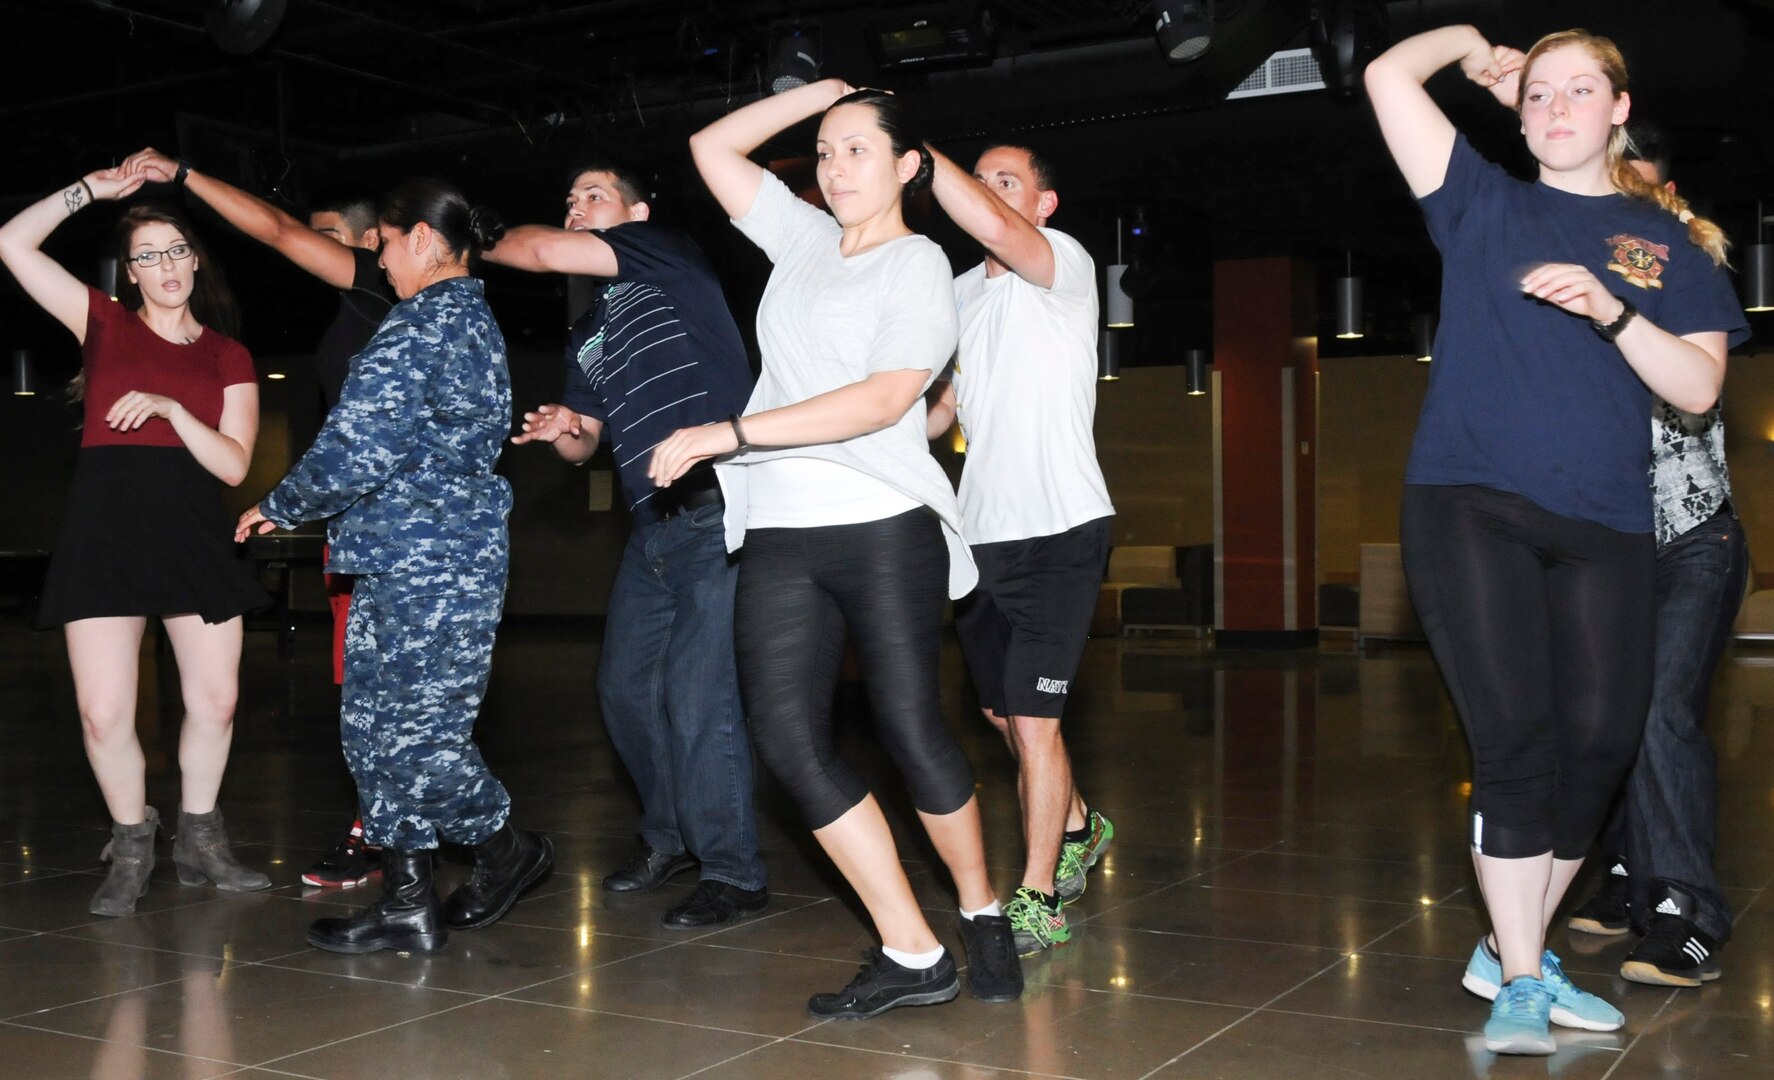 Instructors and students at the Medical Education and Training Campus at Joint Base San Antonio-Fort Sam Houston dance during a class hosted by the Navy Medicine Training Support Center’s Diversity Council at the Student Activity Center. The council began holding the weekly Latin dance class Aug. 3 to help promote cultural awareness and provide a fun recreational activity for students.